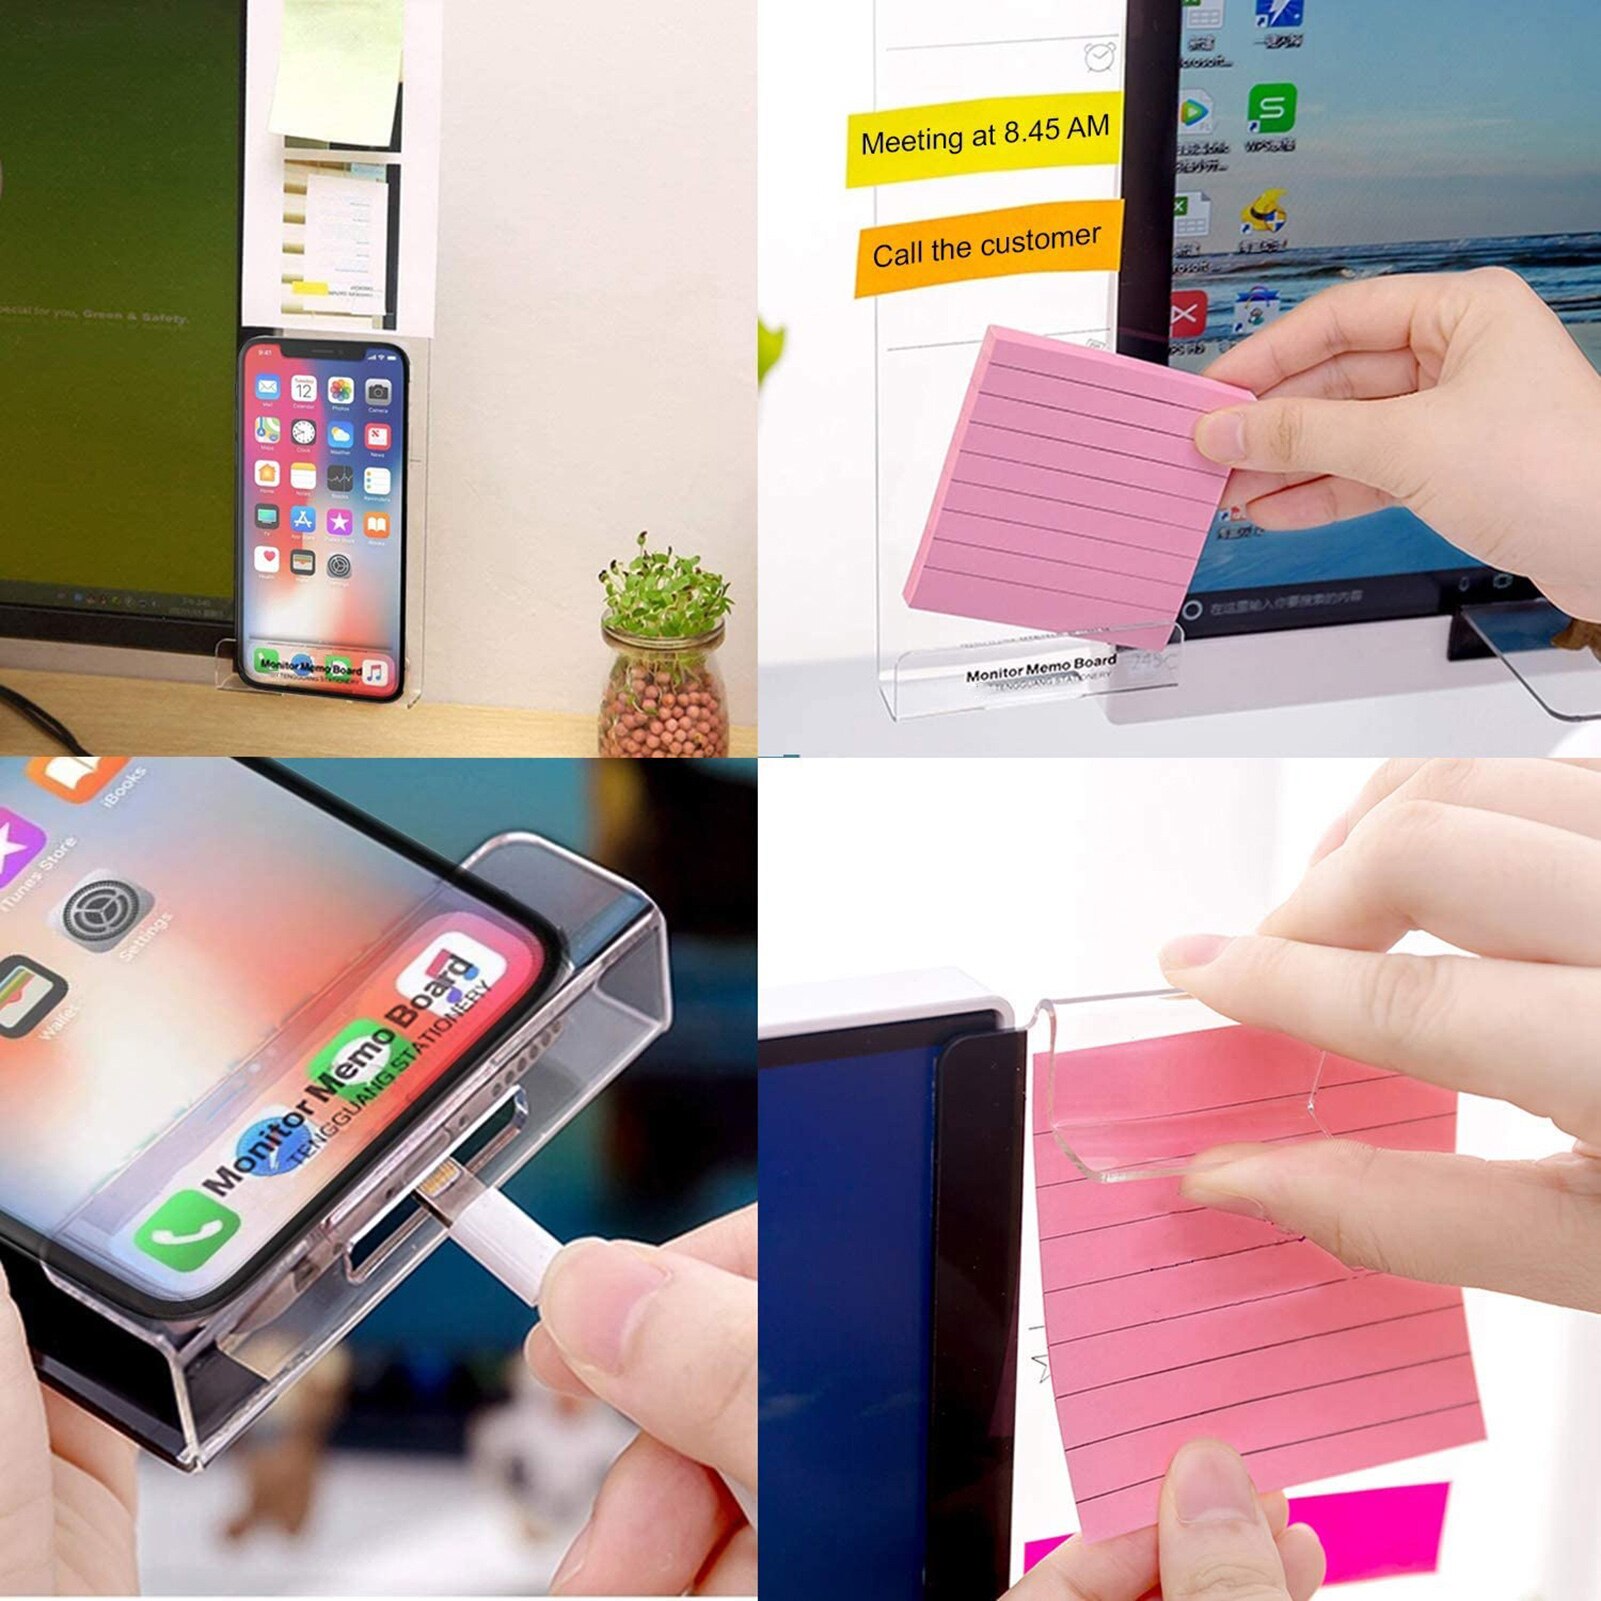 Acrylic Monitor Memo Board Home Sticky Notes Boards Phone Holder Storage Rack Tablet Laptop Computer Accessories